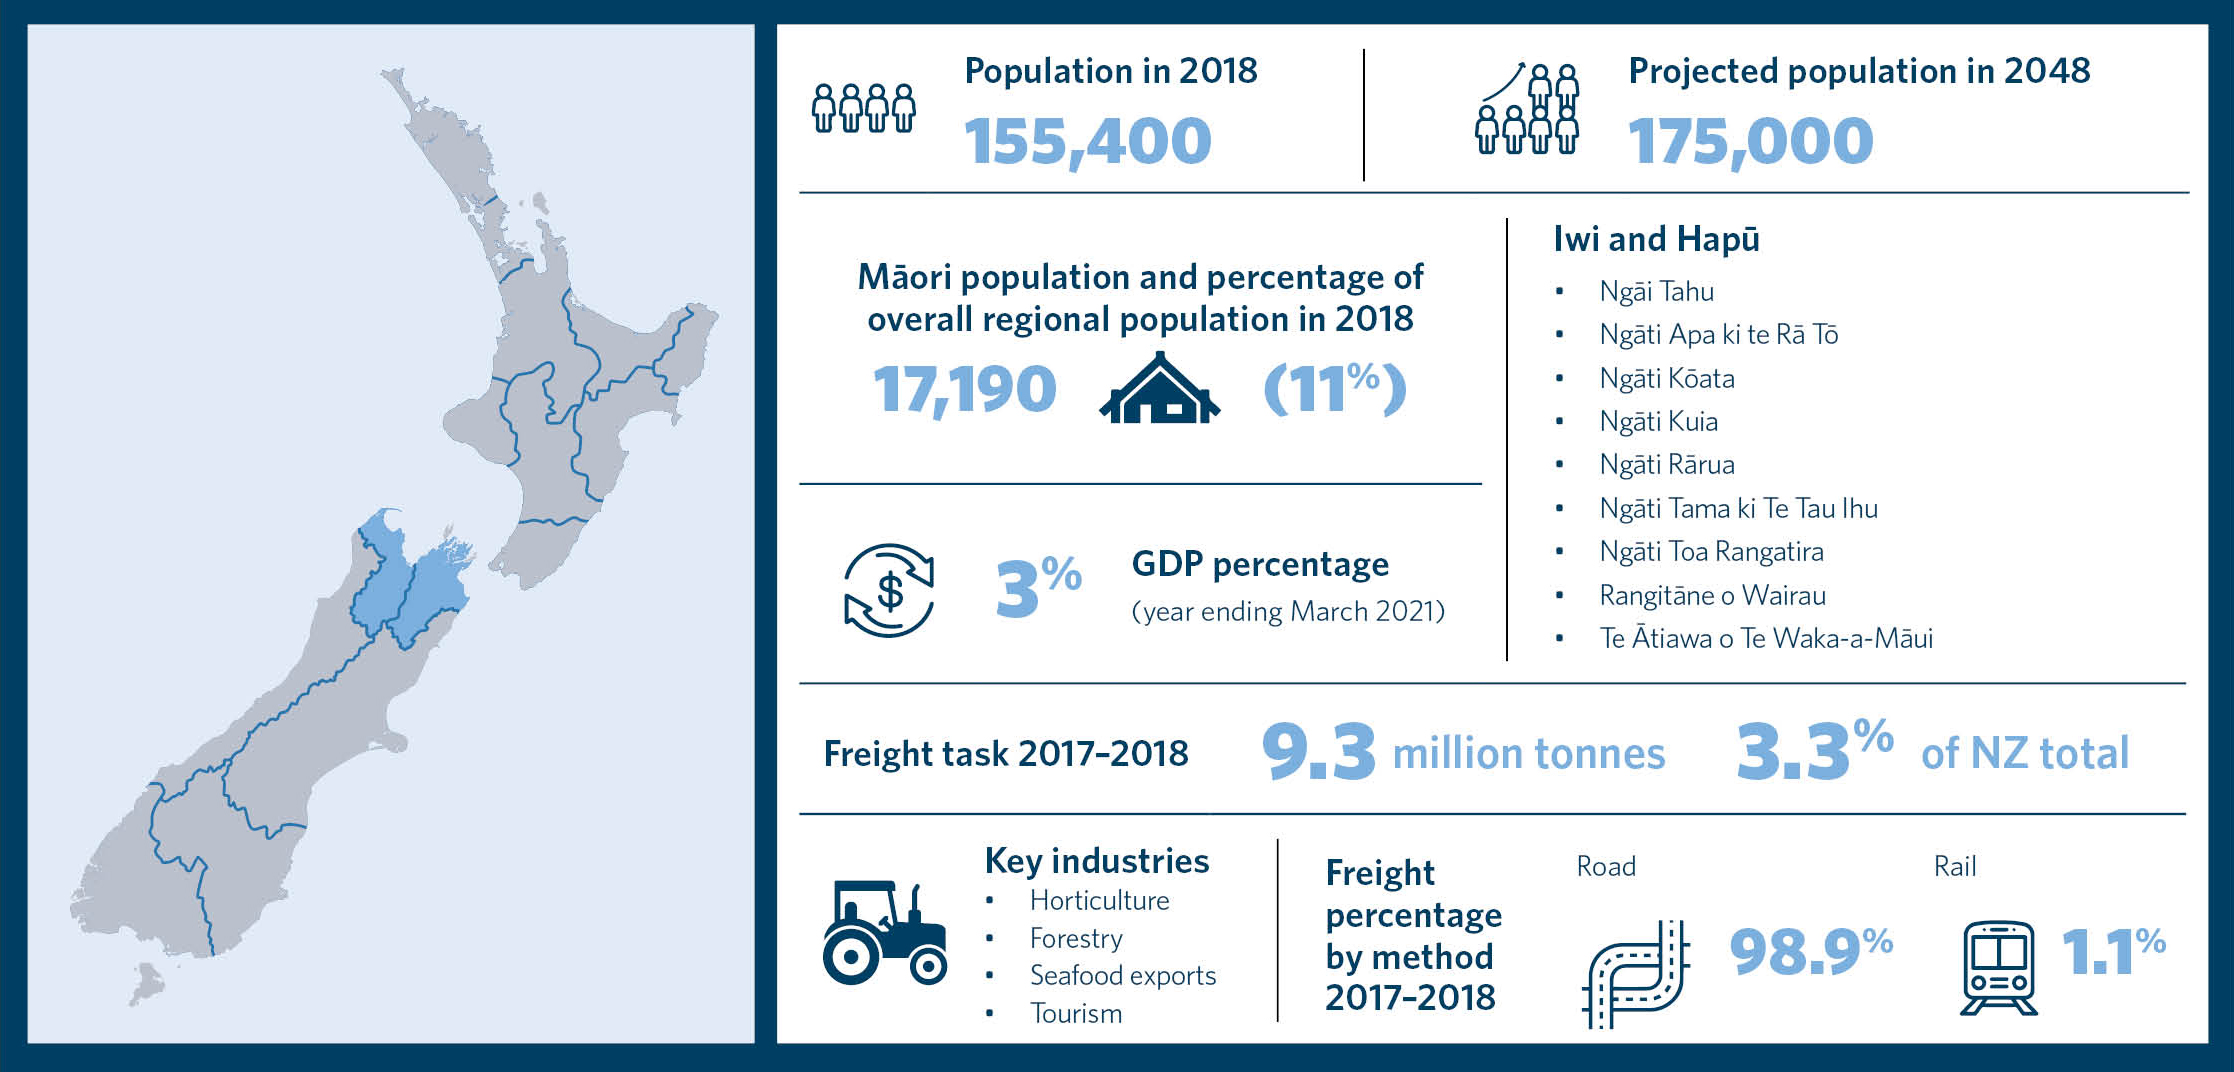 This is an infographic showing statistics for the region of Te Tauihu Top of the South. It includes information about the population in 2018, projected population in 2048, Māori population and percentage of overall regional population in 2018, a list of i